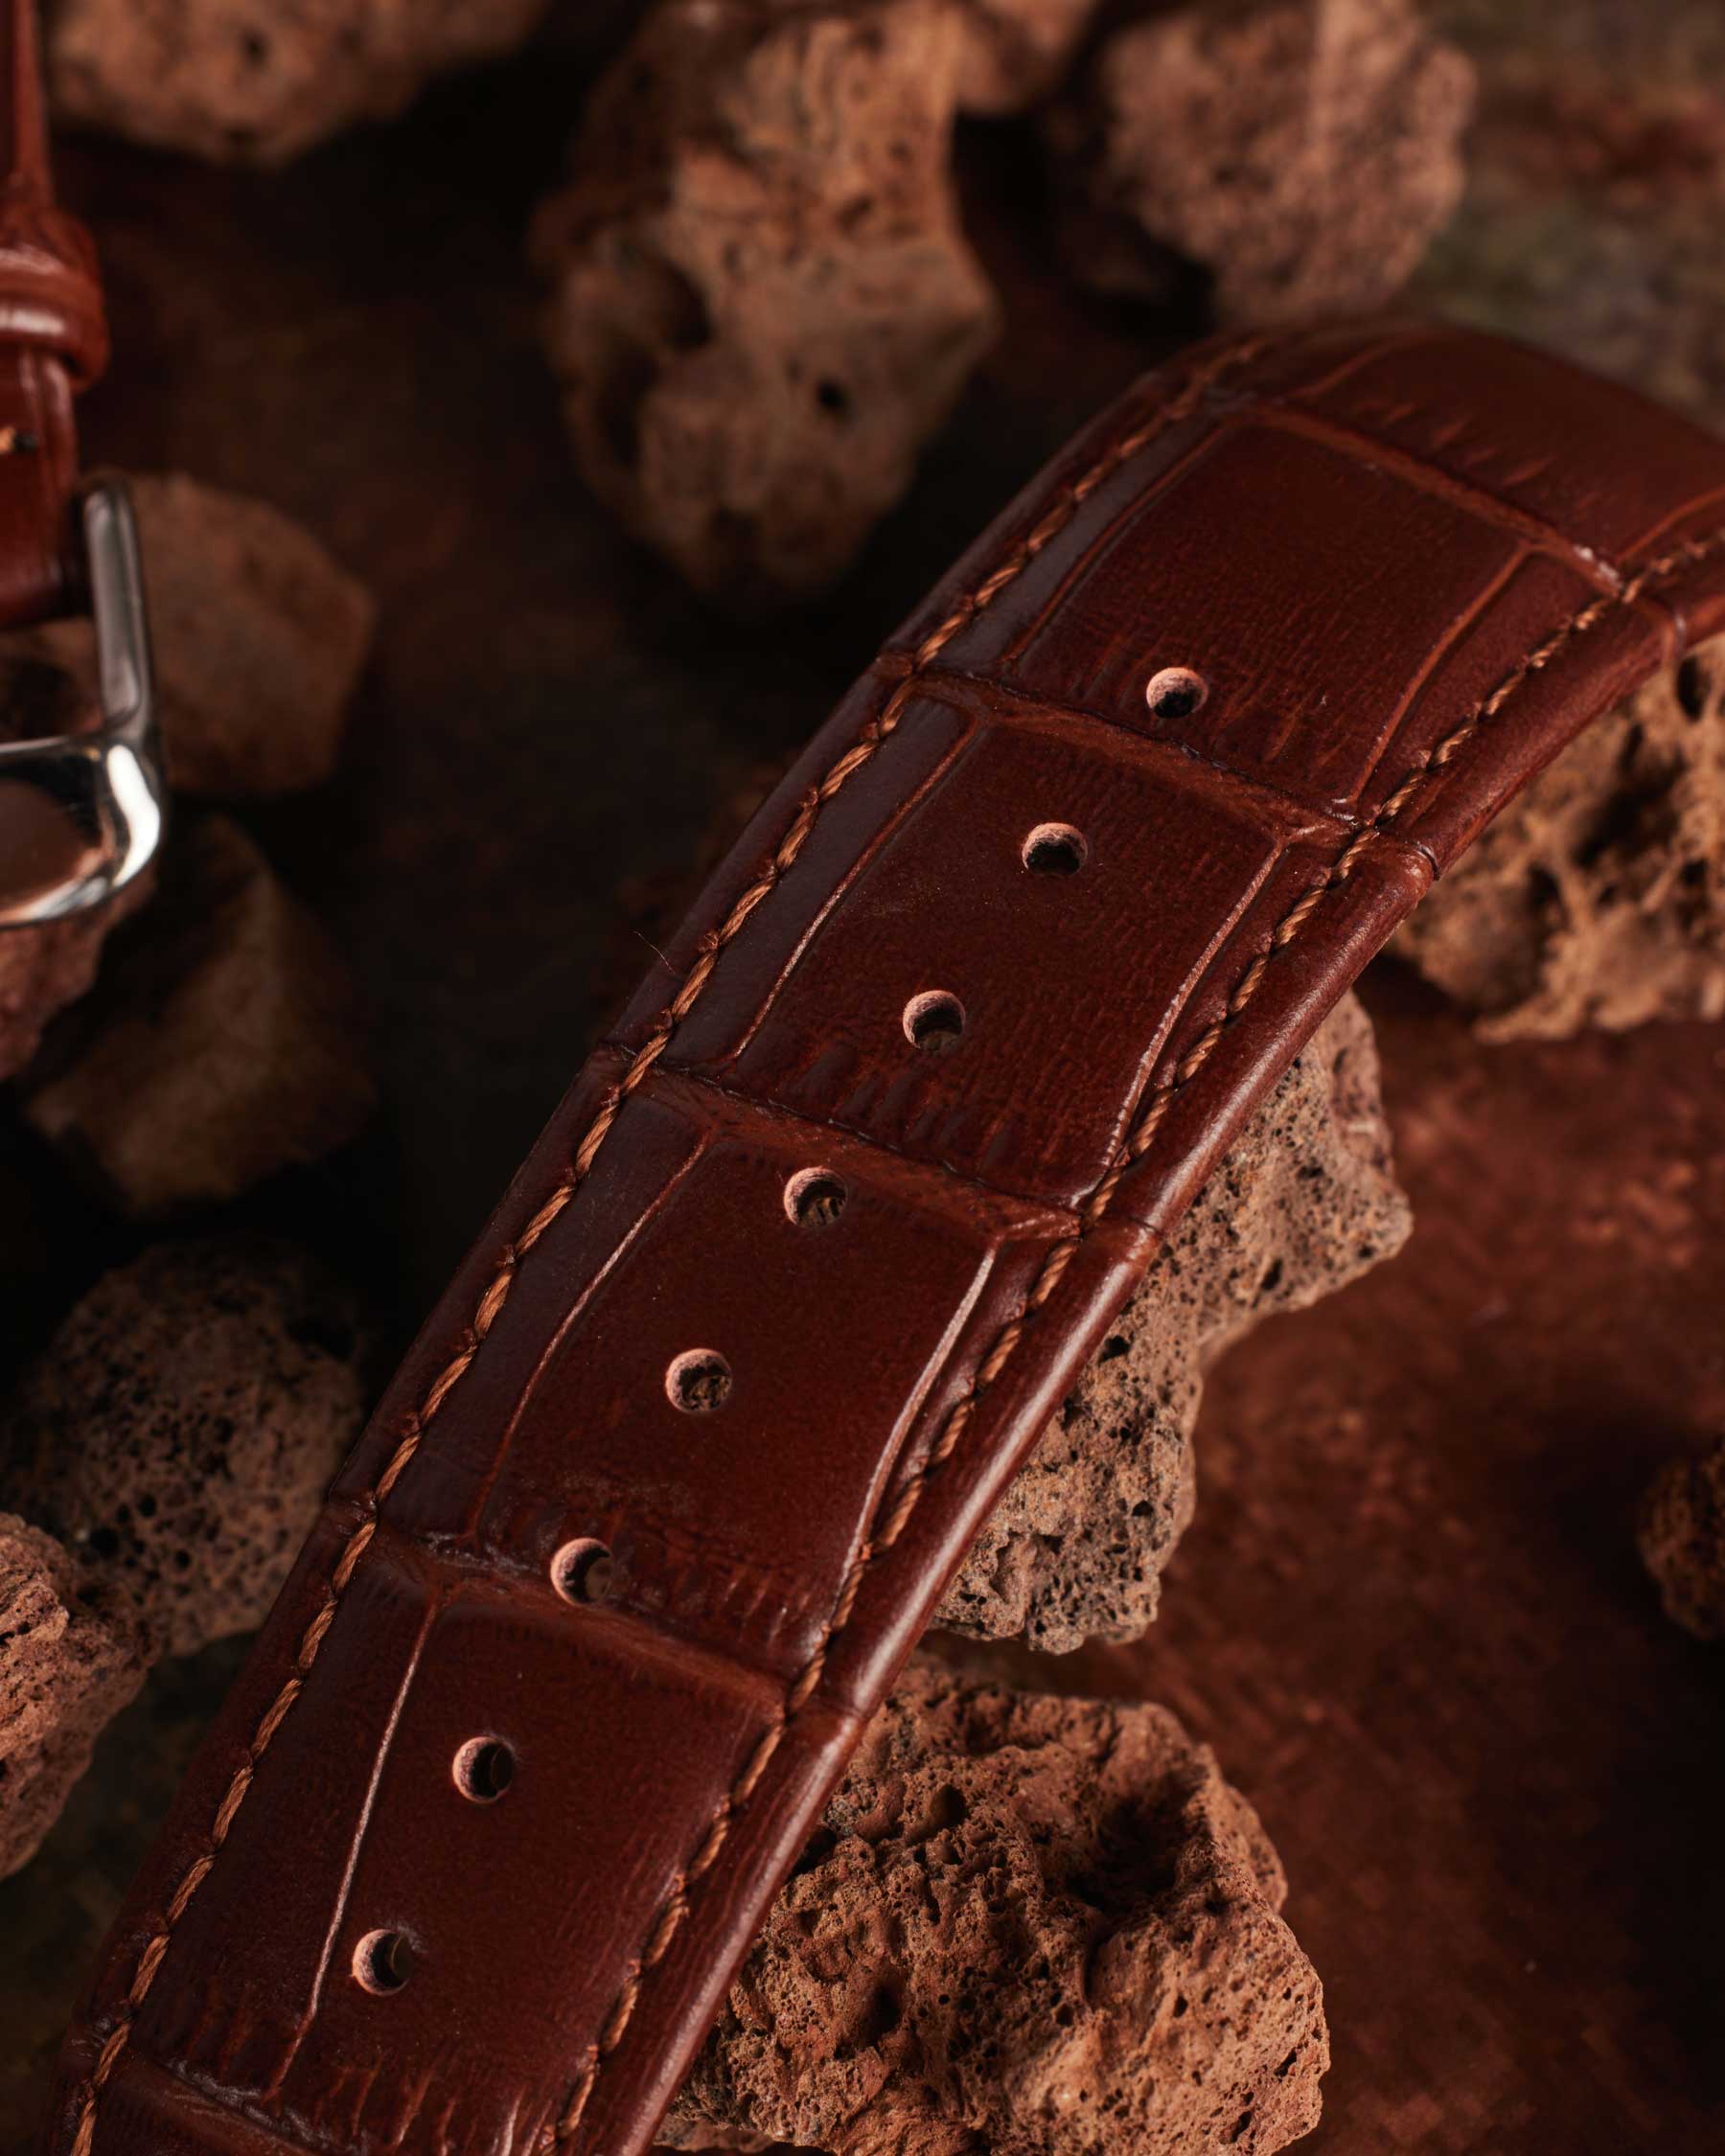 Men's Brown Coffee Leather Strap